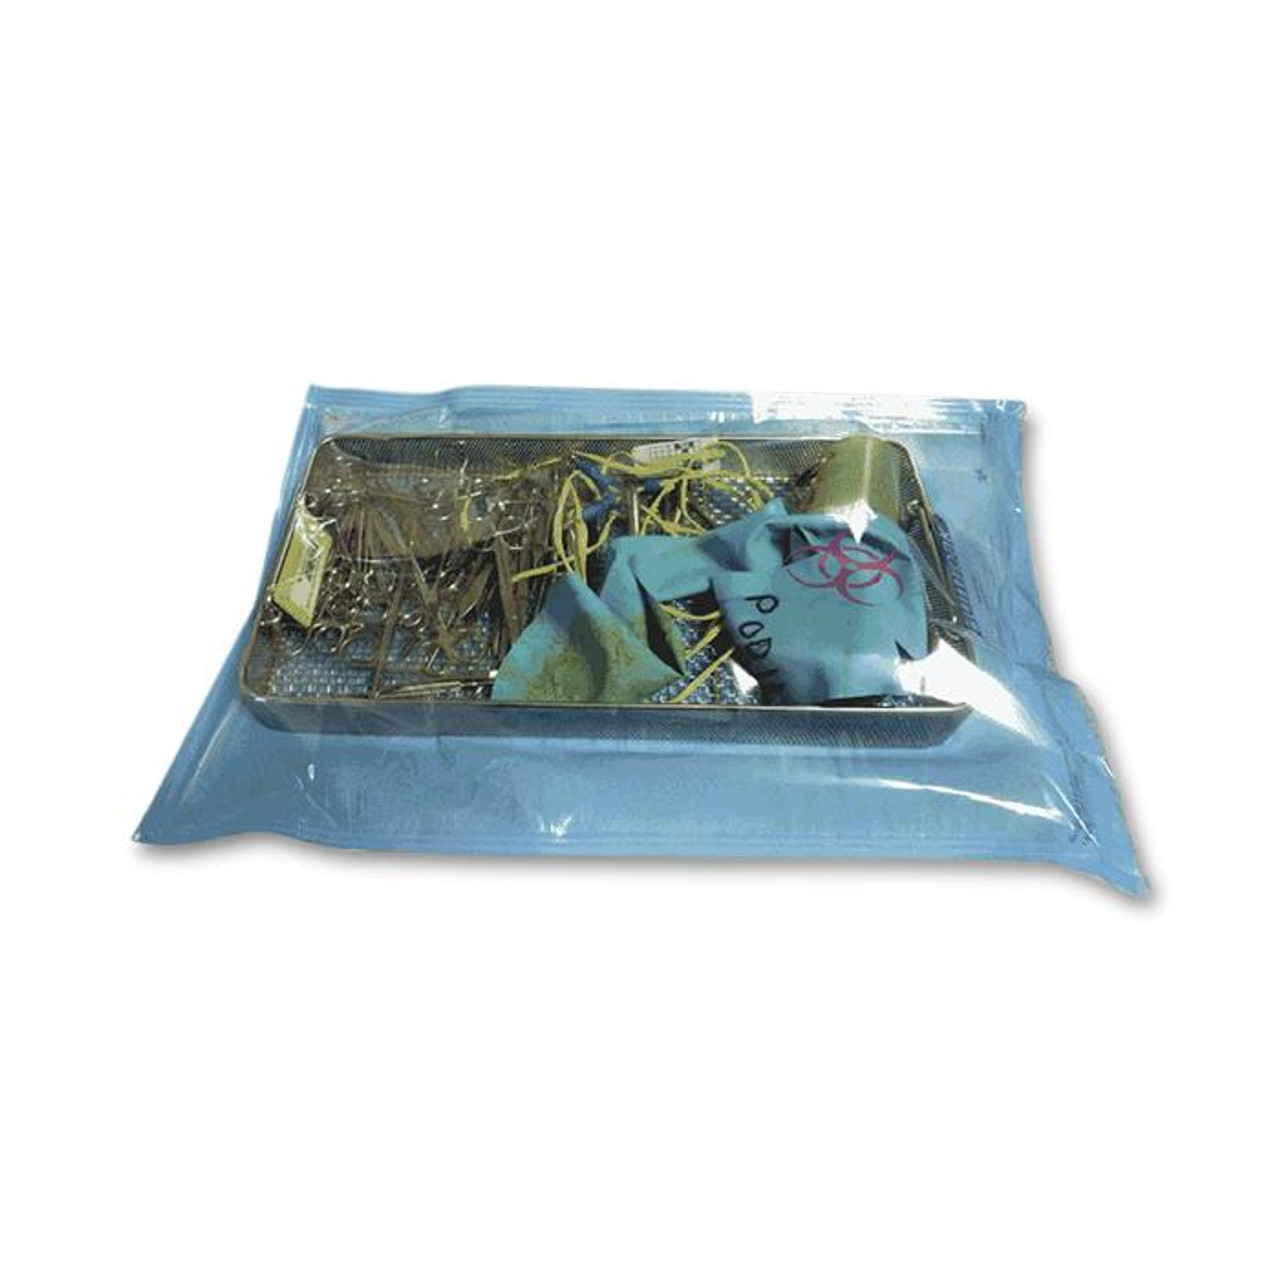 Sterilization Products - Heat Seal Pouches - Healthmark Industries